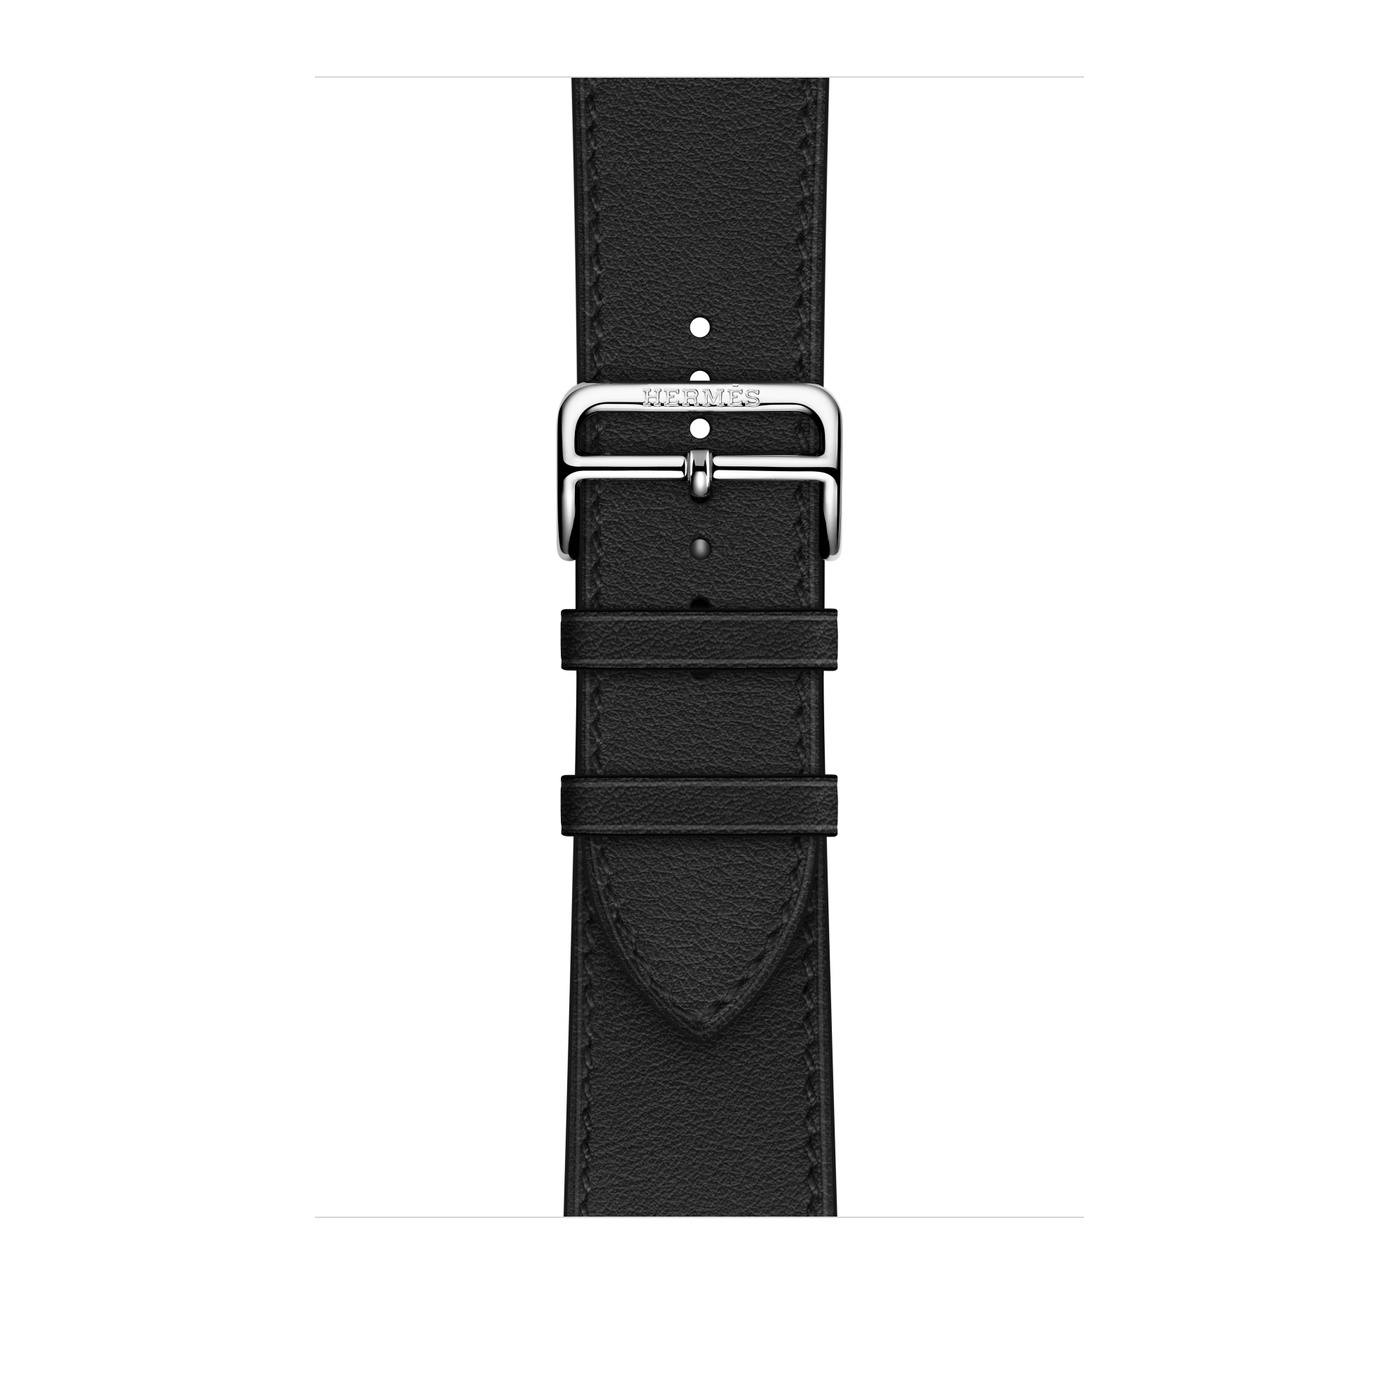 Apple Watch Hermès 45mm Space Black Stainless Steel Case with Single Tour Deployment Buckle